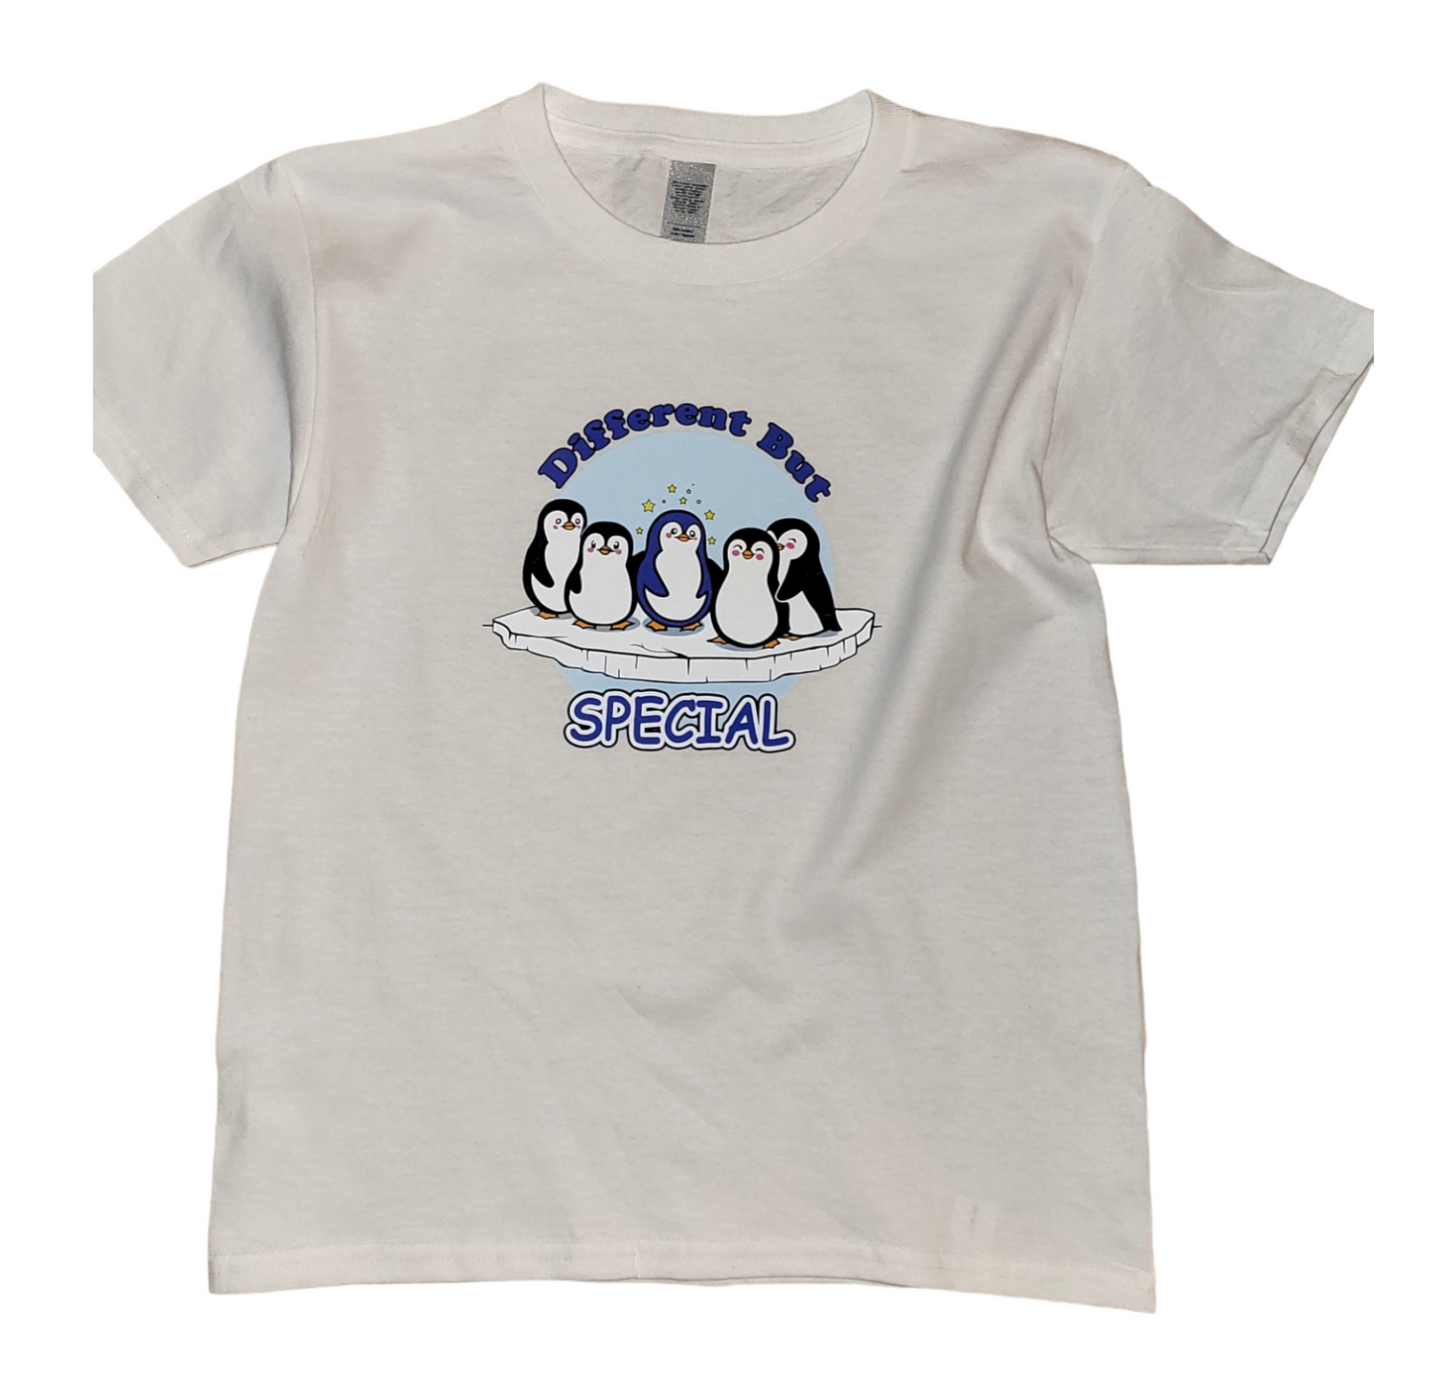 Different but Special Kids T shirt